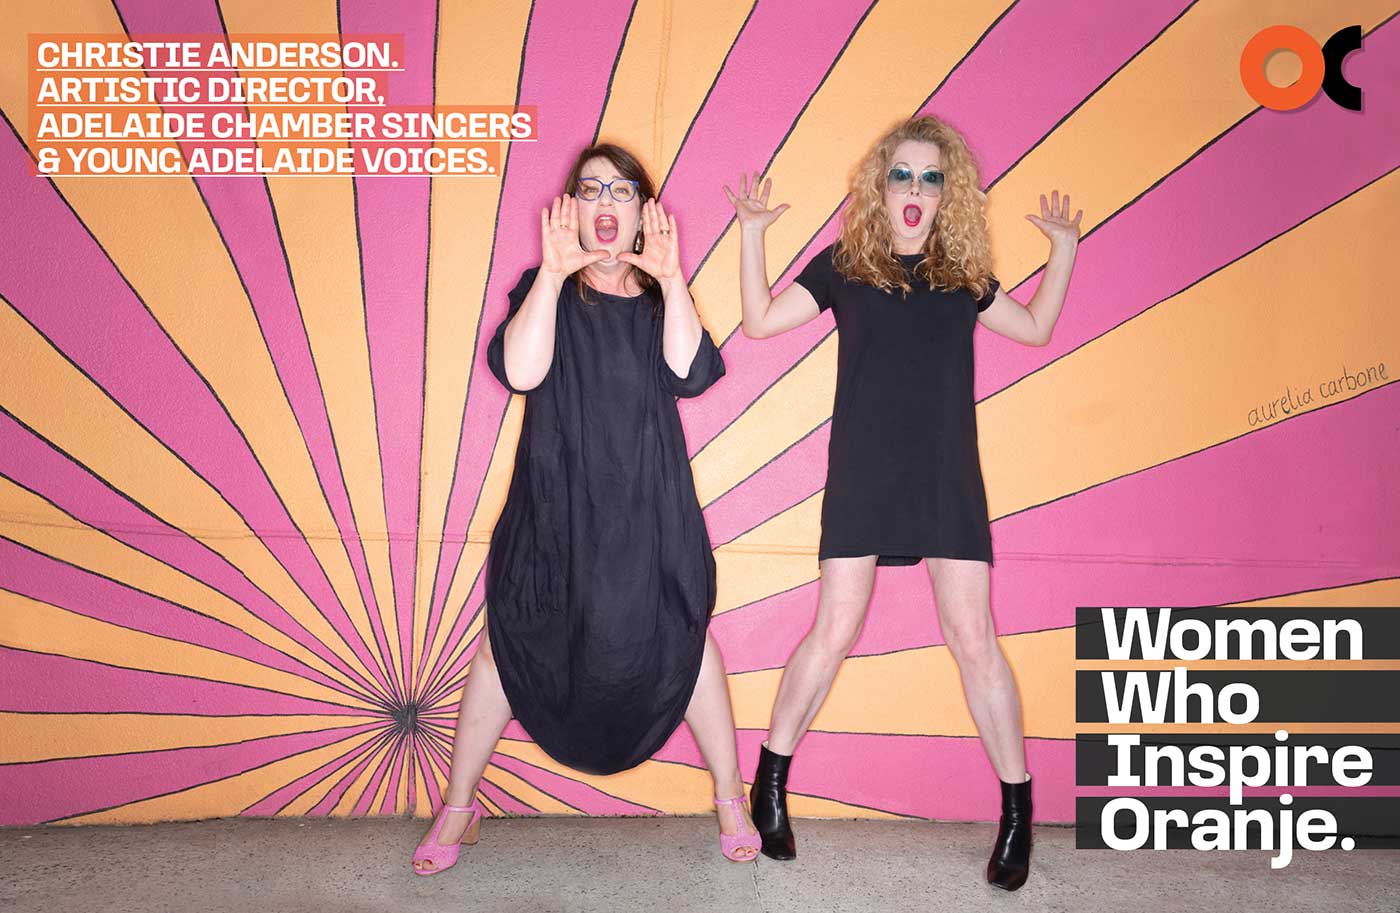 Women Who Inspire Oranje - Christie Anderson, Artistic Director Adelaide Chamber Singers and Young Adelaide Voices